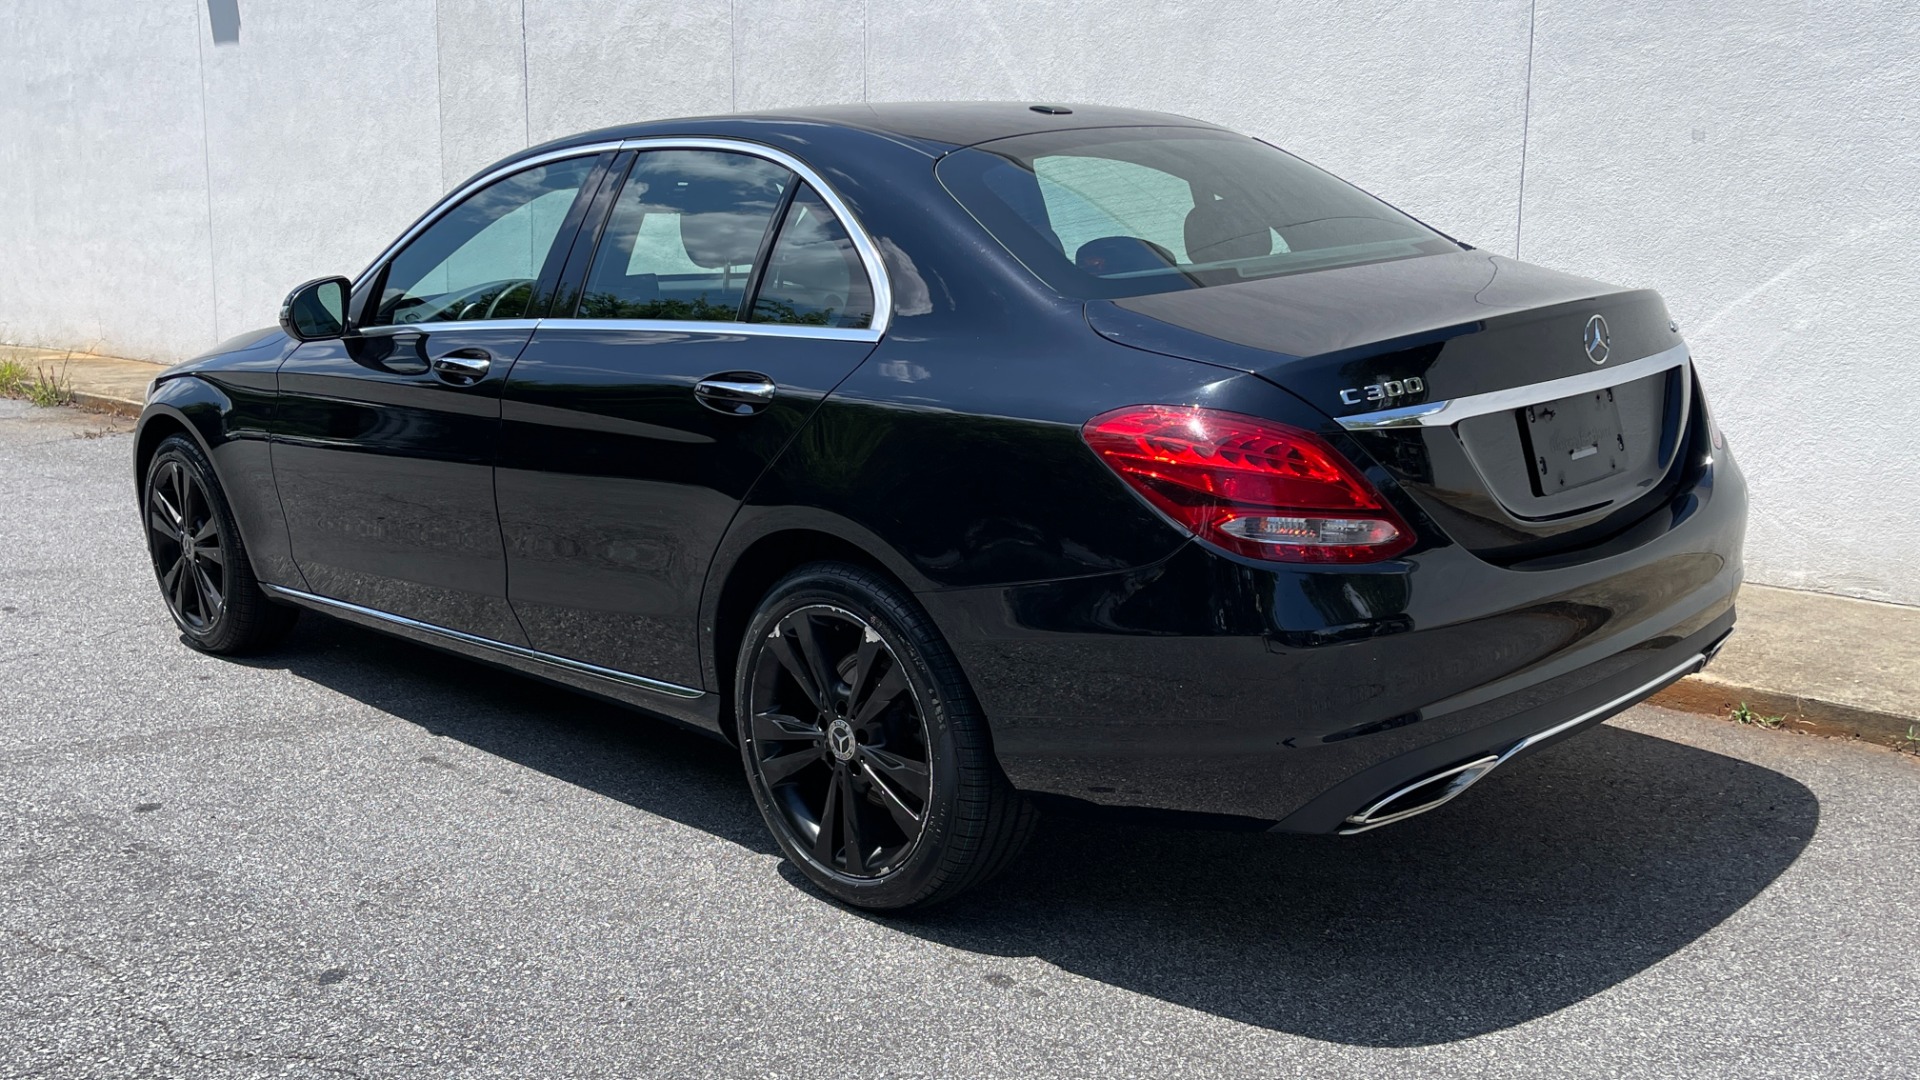 Used 2018 Mercedes-Benz C-Class C 300 / PREMIUM / REVIEW CAM / HTD SEATS / 18IN WHEELS for sale $27,999 at Formula Imports in Charlotte NC 28227 6